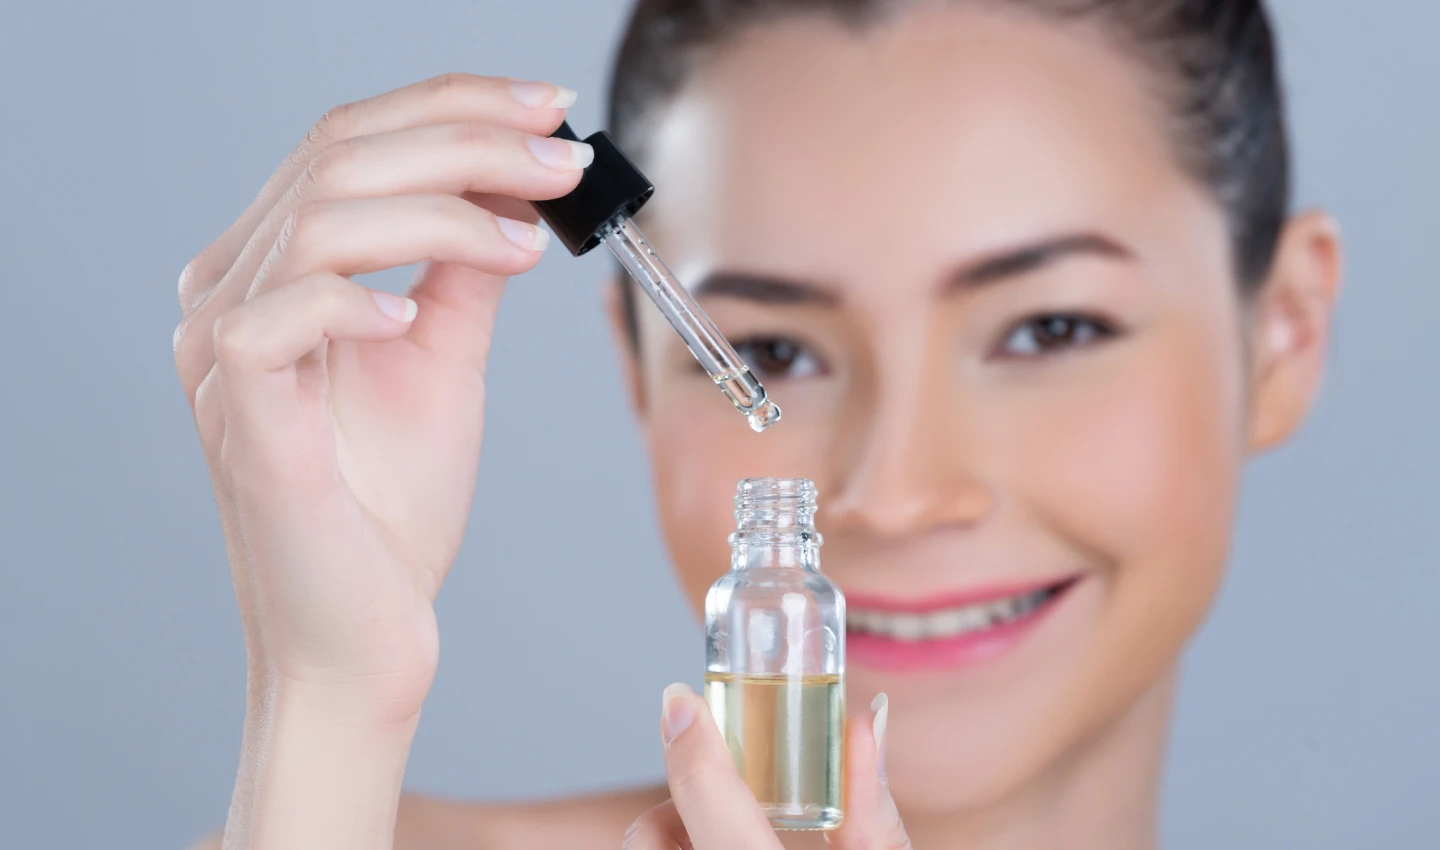 Woman holding and smiling at a bottle of facial oil for sensitive skin.